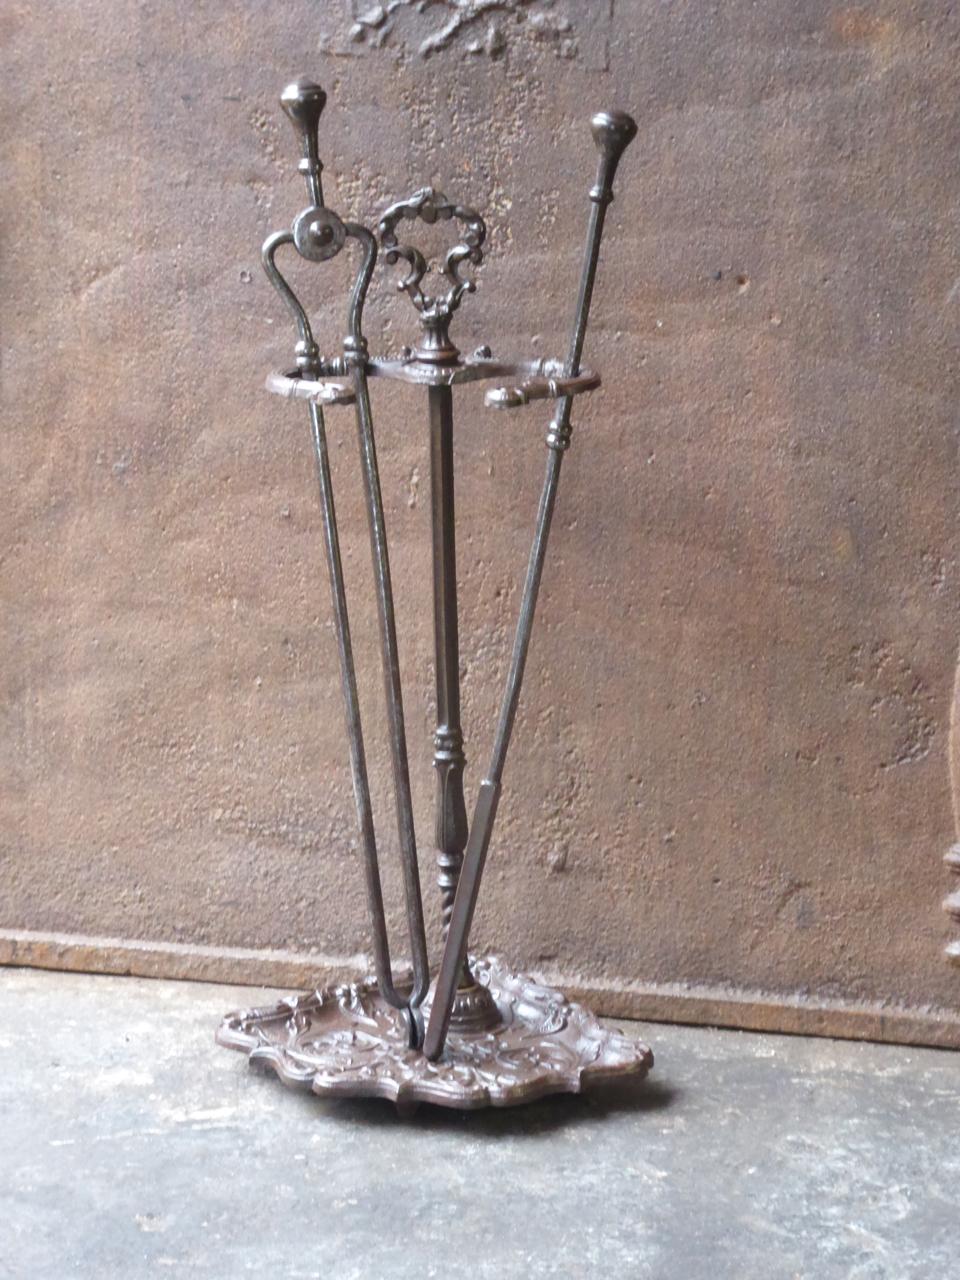 19th century English Victorian fireplace toolset. The toolset is made of cast iron and wrought iron. It consists of a stand with two fireplace tools. The toolset is in a good condition and is fully functional.

